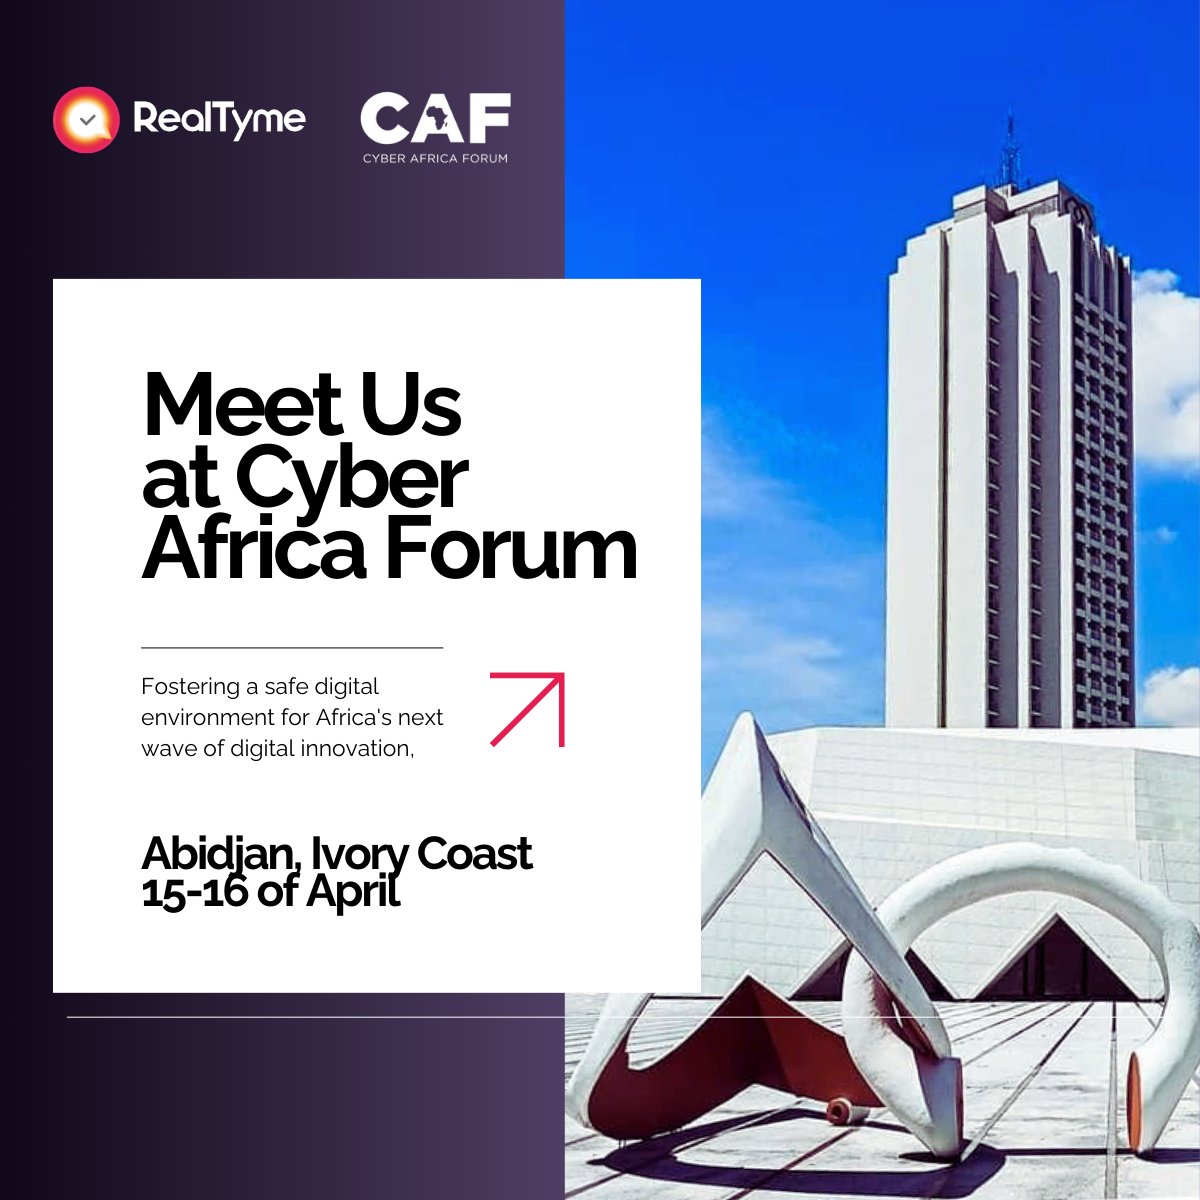 🌐 Coming at you live from the #CyberAfricaForum! This April 15-16, #RealTyme will bring you the lowdown on cybersecurity as you've never seen it before. Find out why #RealTyme is the name buzzing on everyone’s lips in #DigitalSecurity.

#SecureTech #AfricaCyberTech